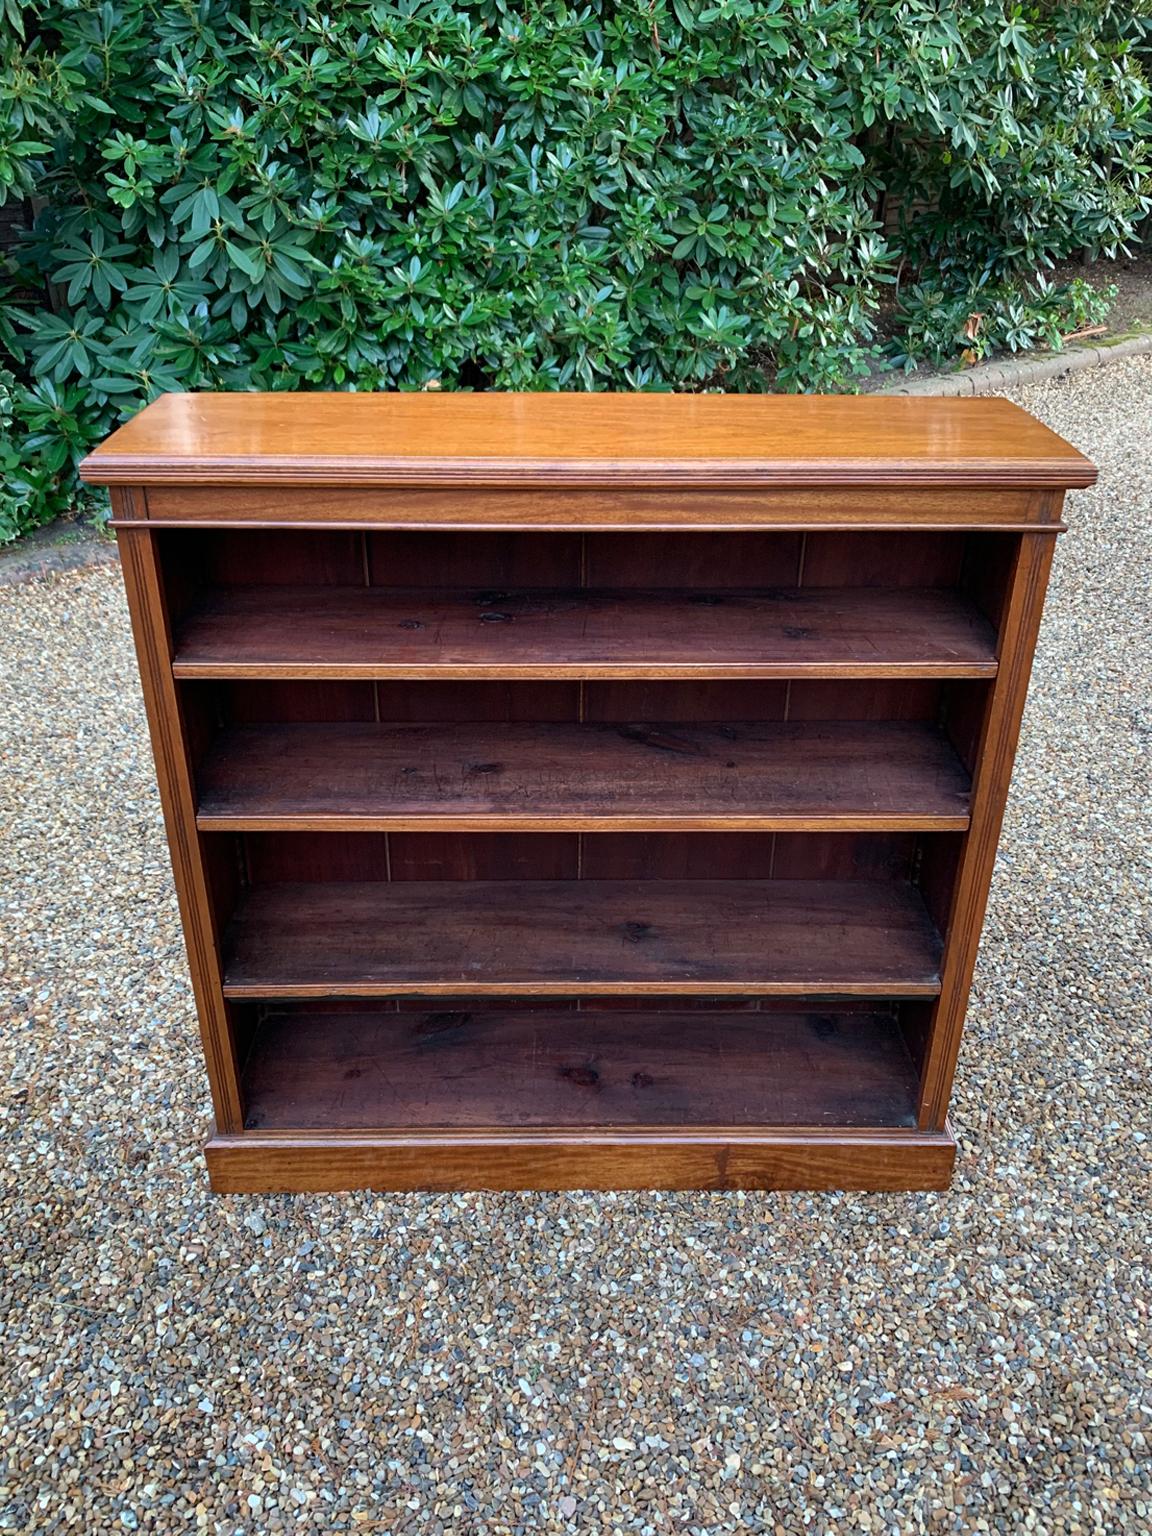 19th Century Victorian open bookcase, fitted with three adjustable shelves on a plinth base.